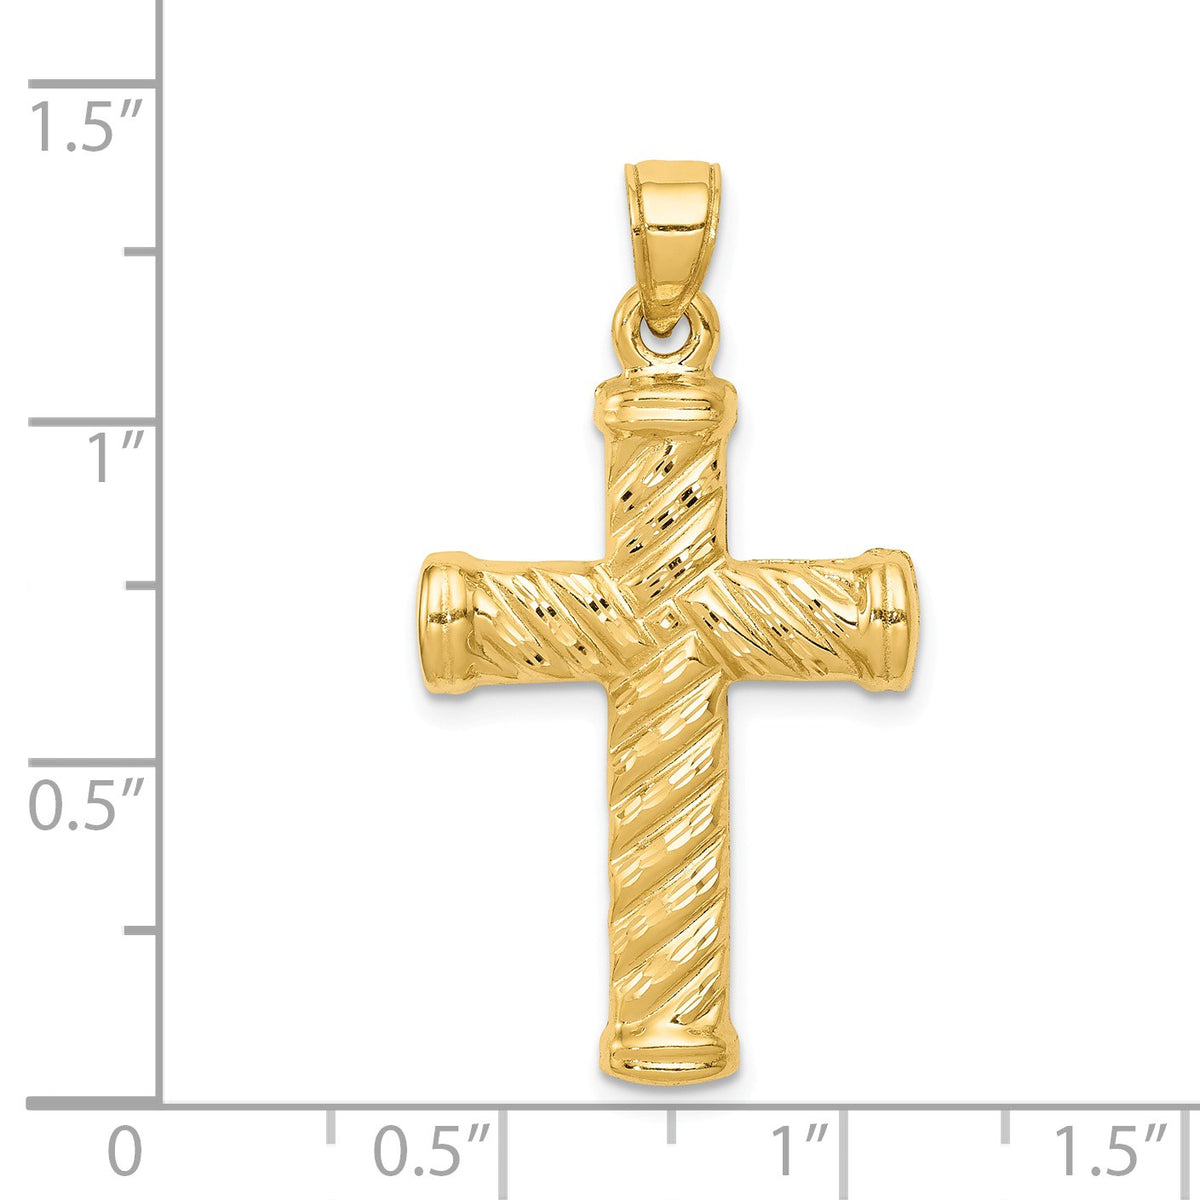 Alternate view of the 14k Yellow Gold Polished Reversible Rope Cross Pendant by The Black Bow Jewelry Co.